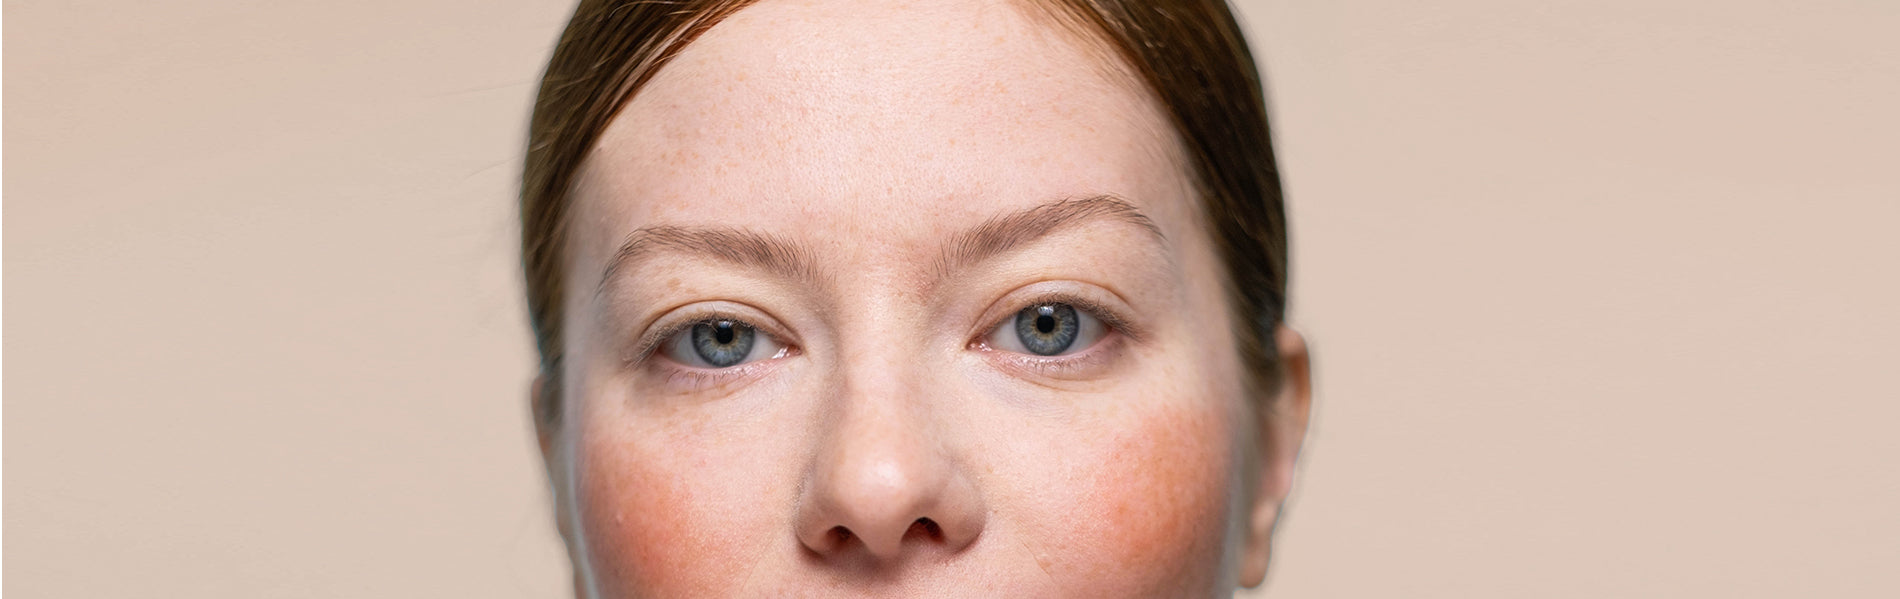 Reducing Redness: How LED Light Therapy Can Soothe Rosacea Symptoms